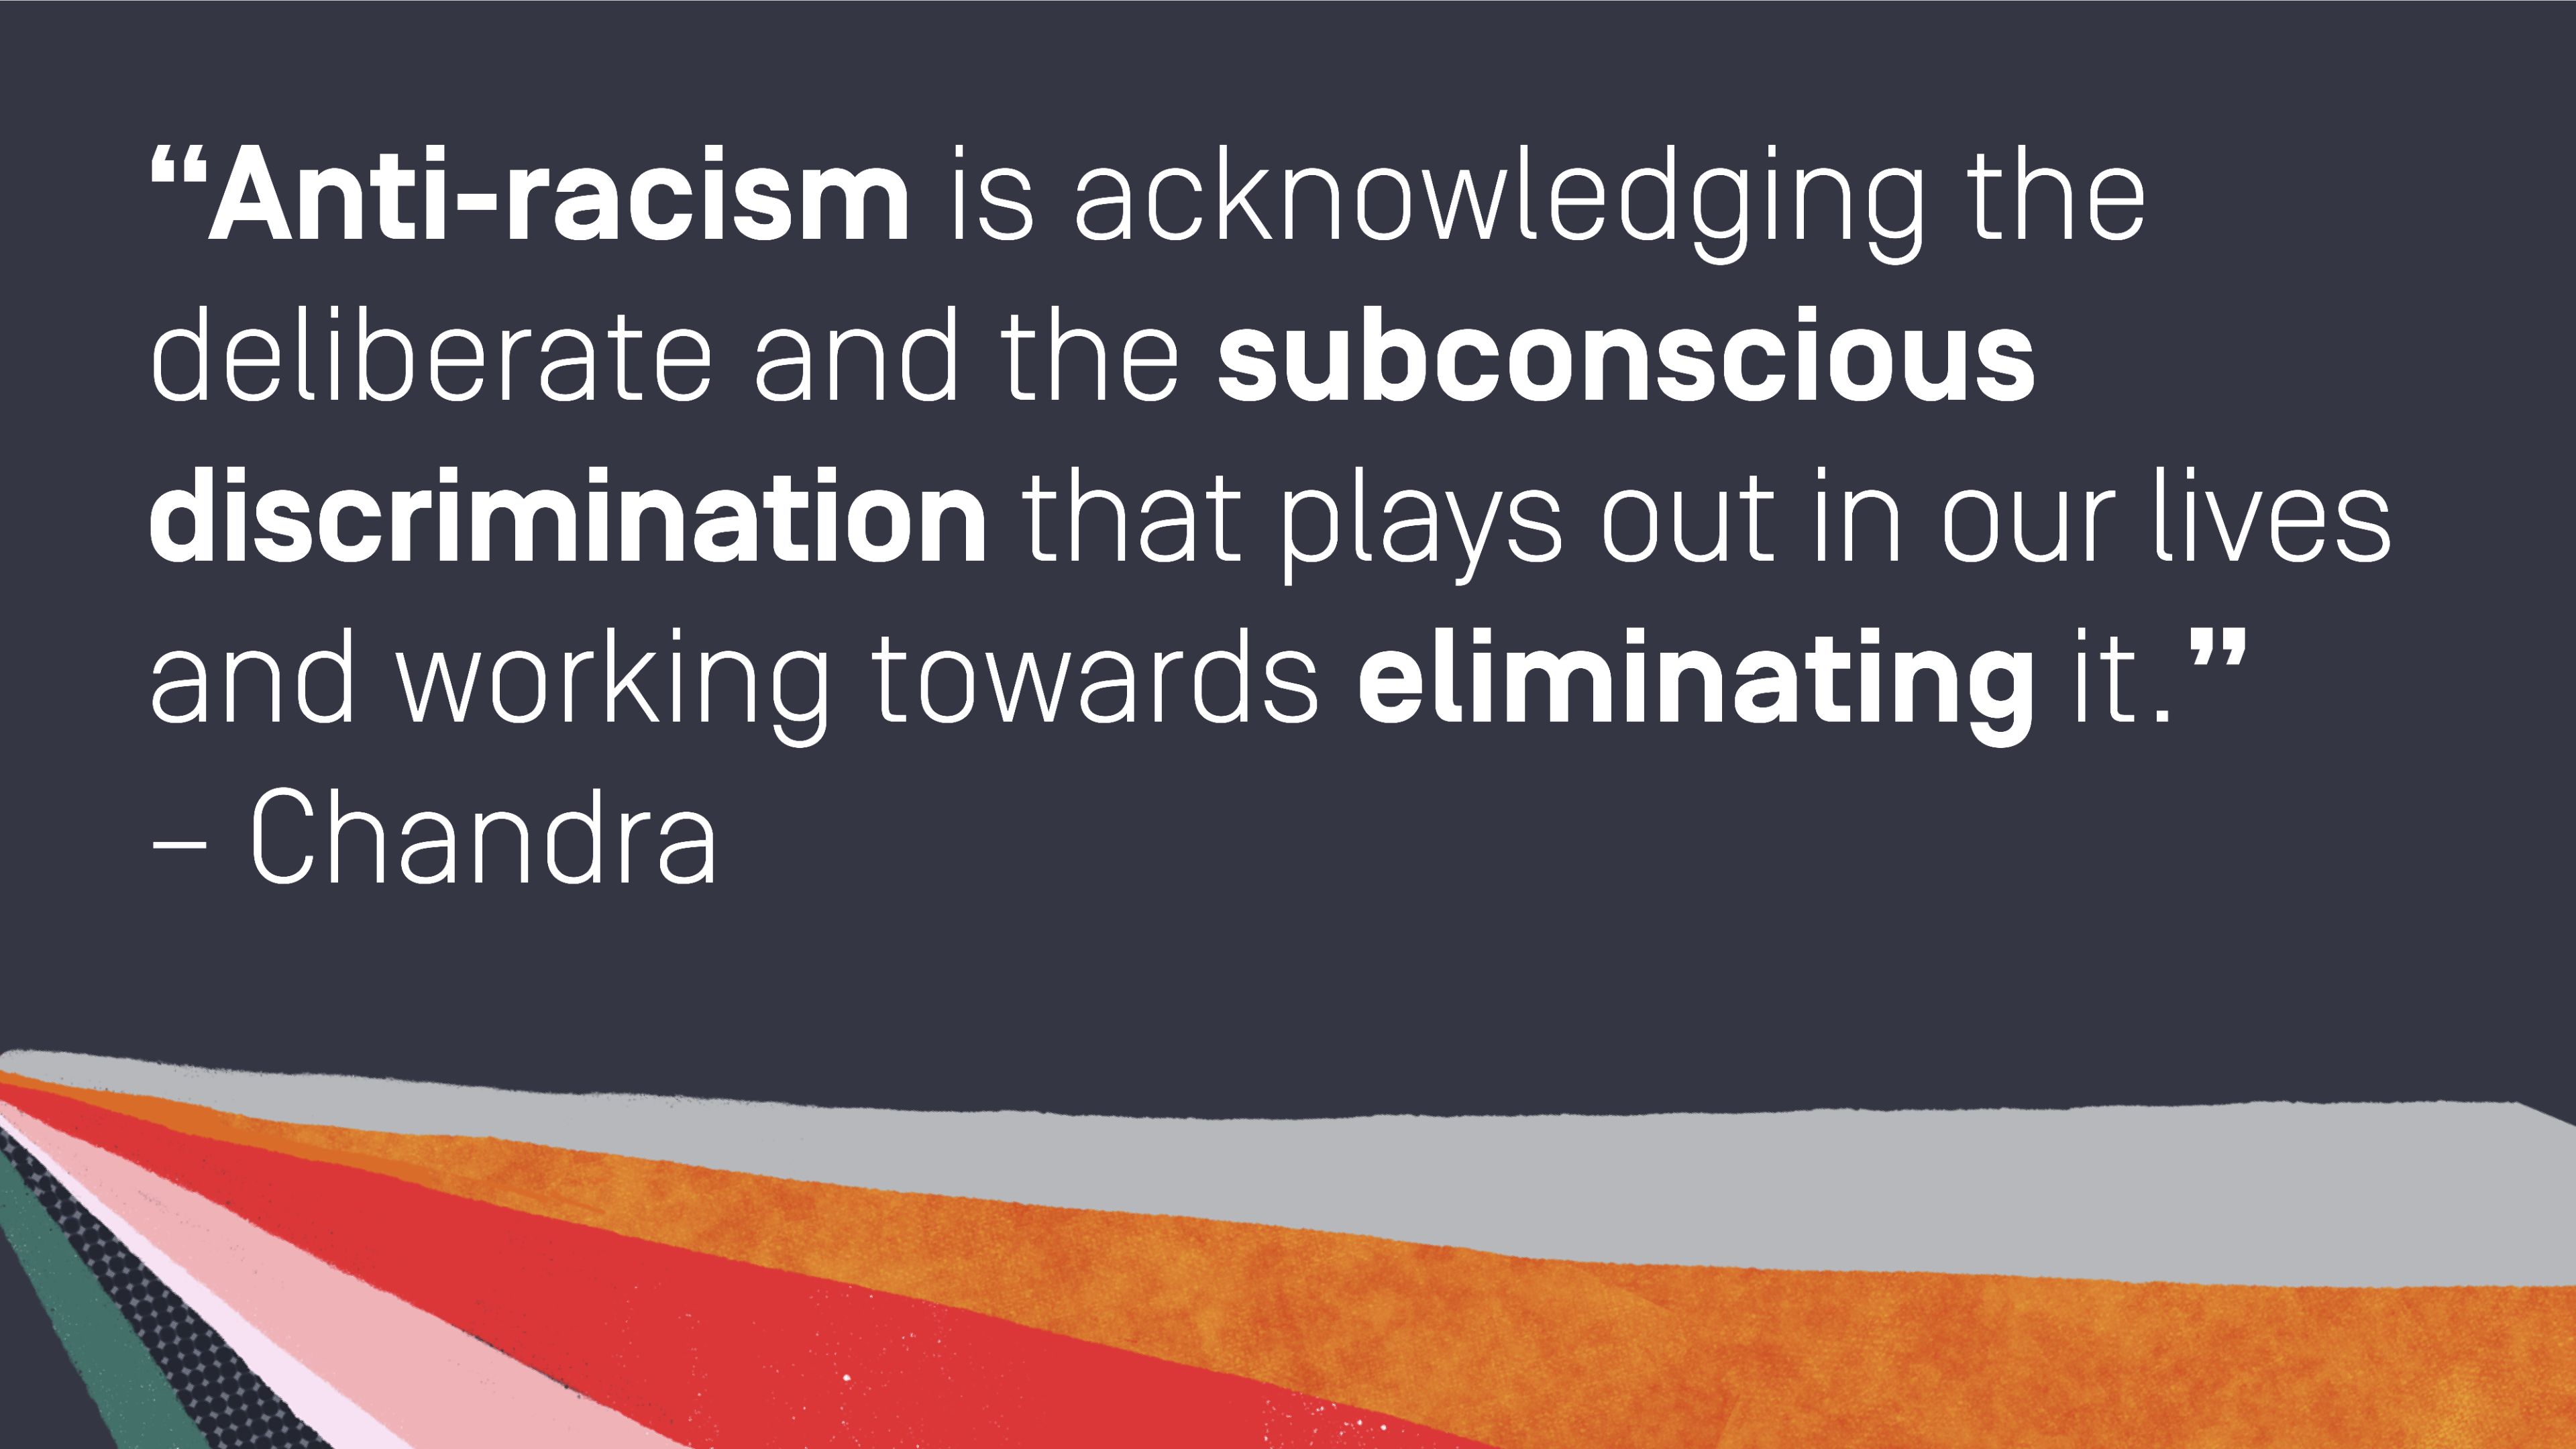 Quote by Chandra: "Anti-racism is acknowledging the deliberate and the subconscious discrimination that plays out in our lives and working towards eliminating it."